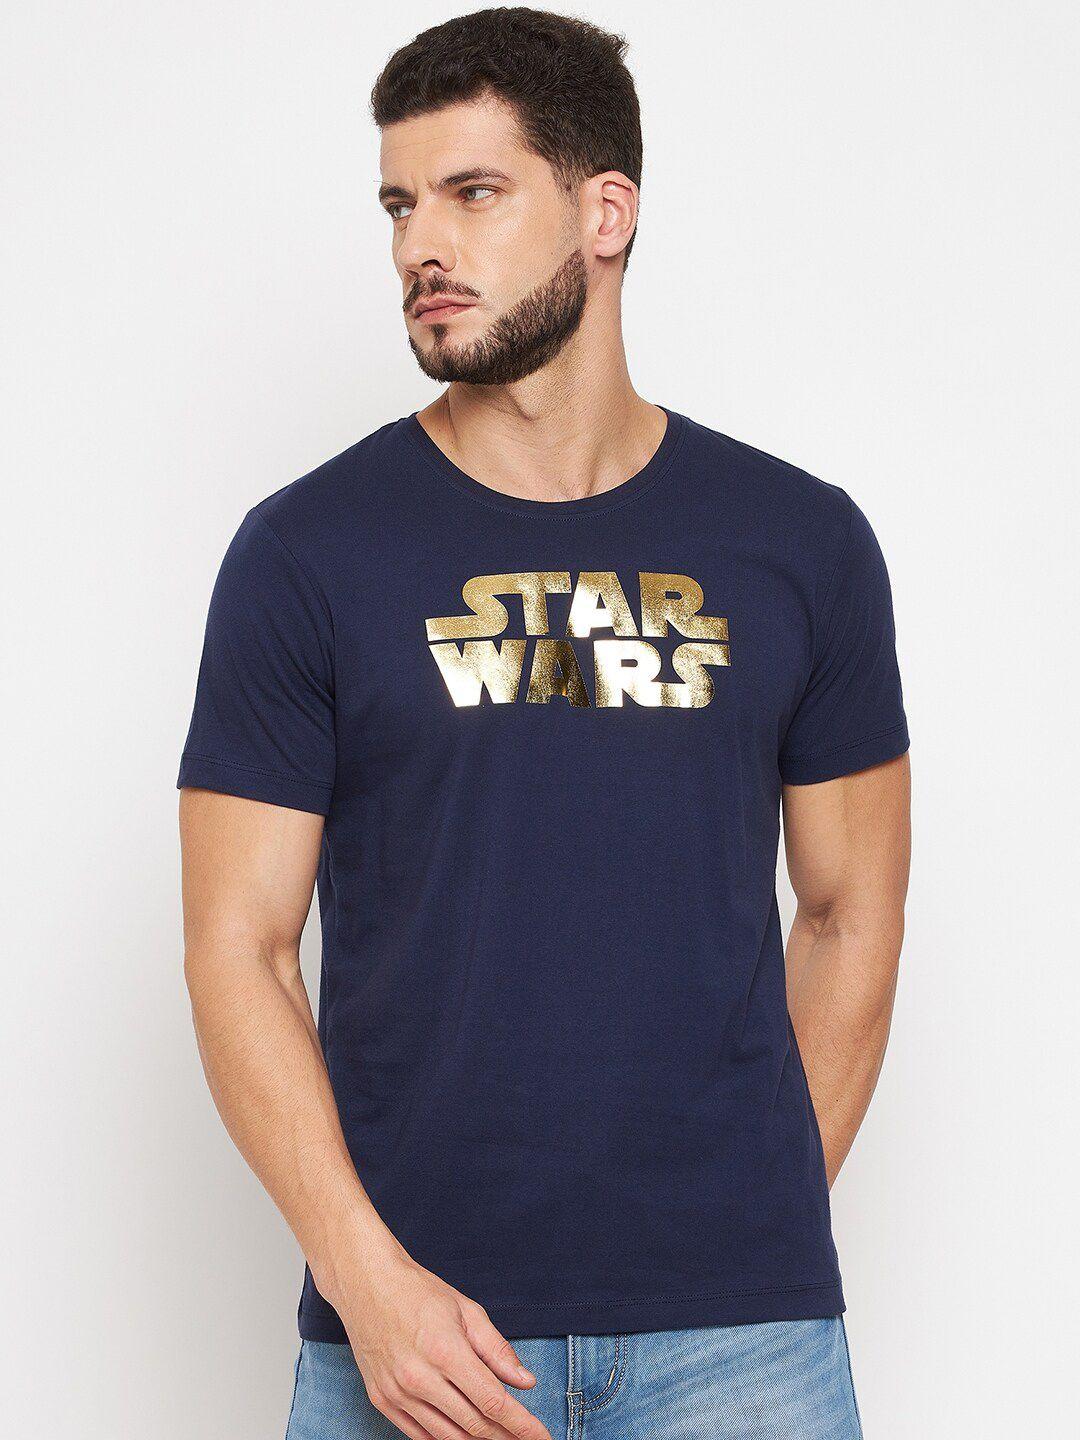 star wars by wear your mind typography printed pure cotton t-shirt